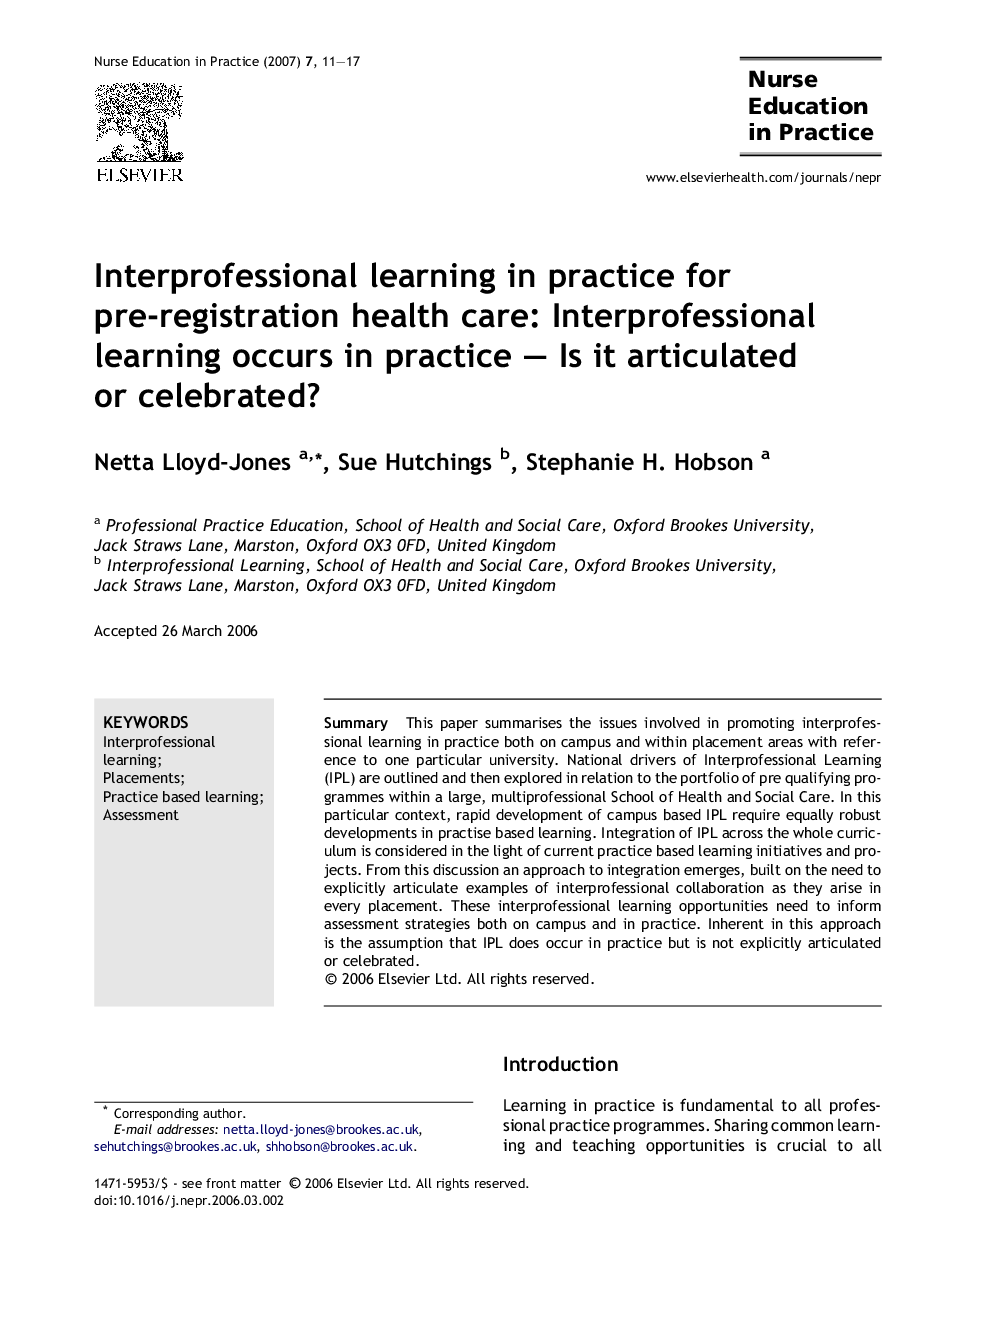 Interprofessional learning in practice for pre-registration health care: Interprofessional learning occurs in practice – Is it articulated or celebrated?